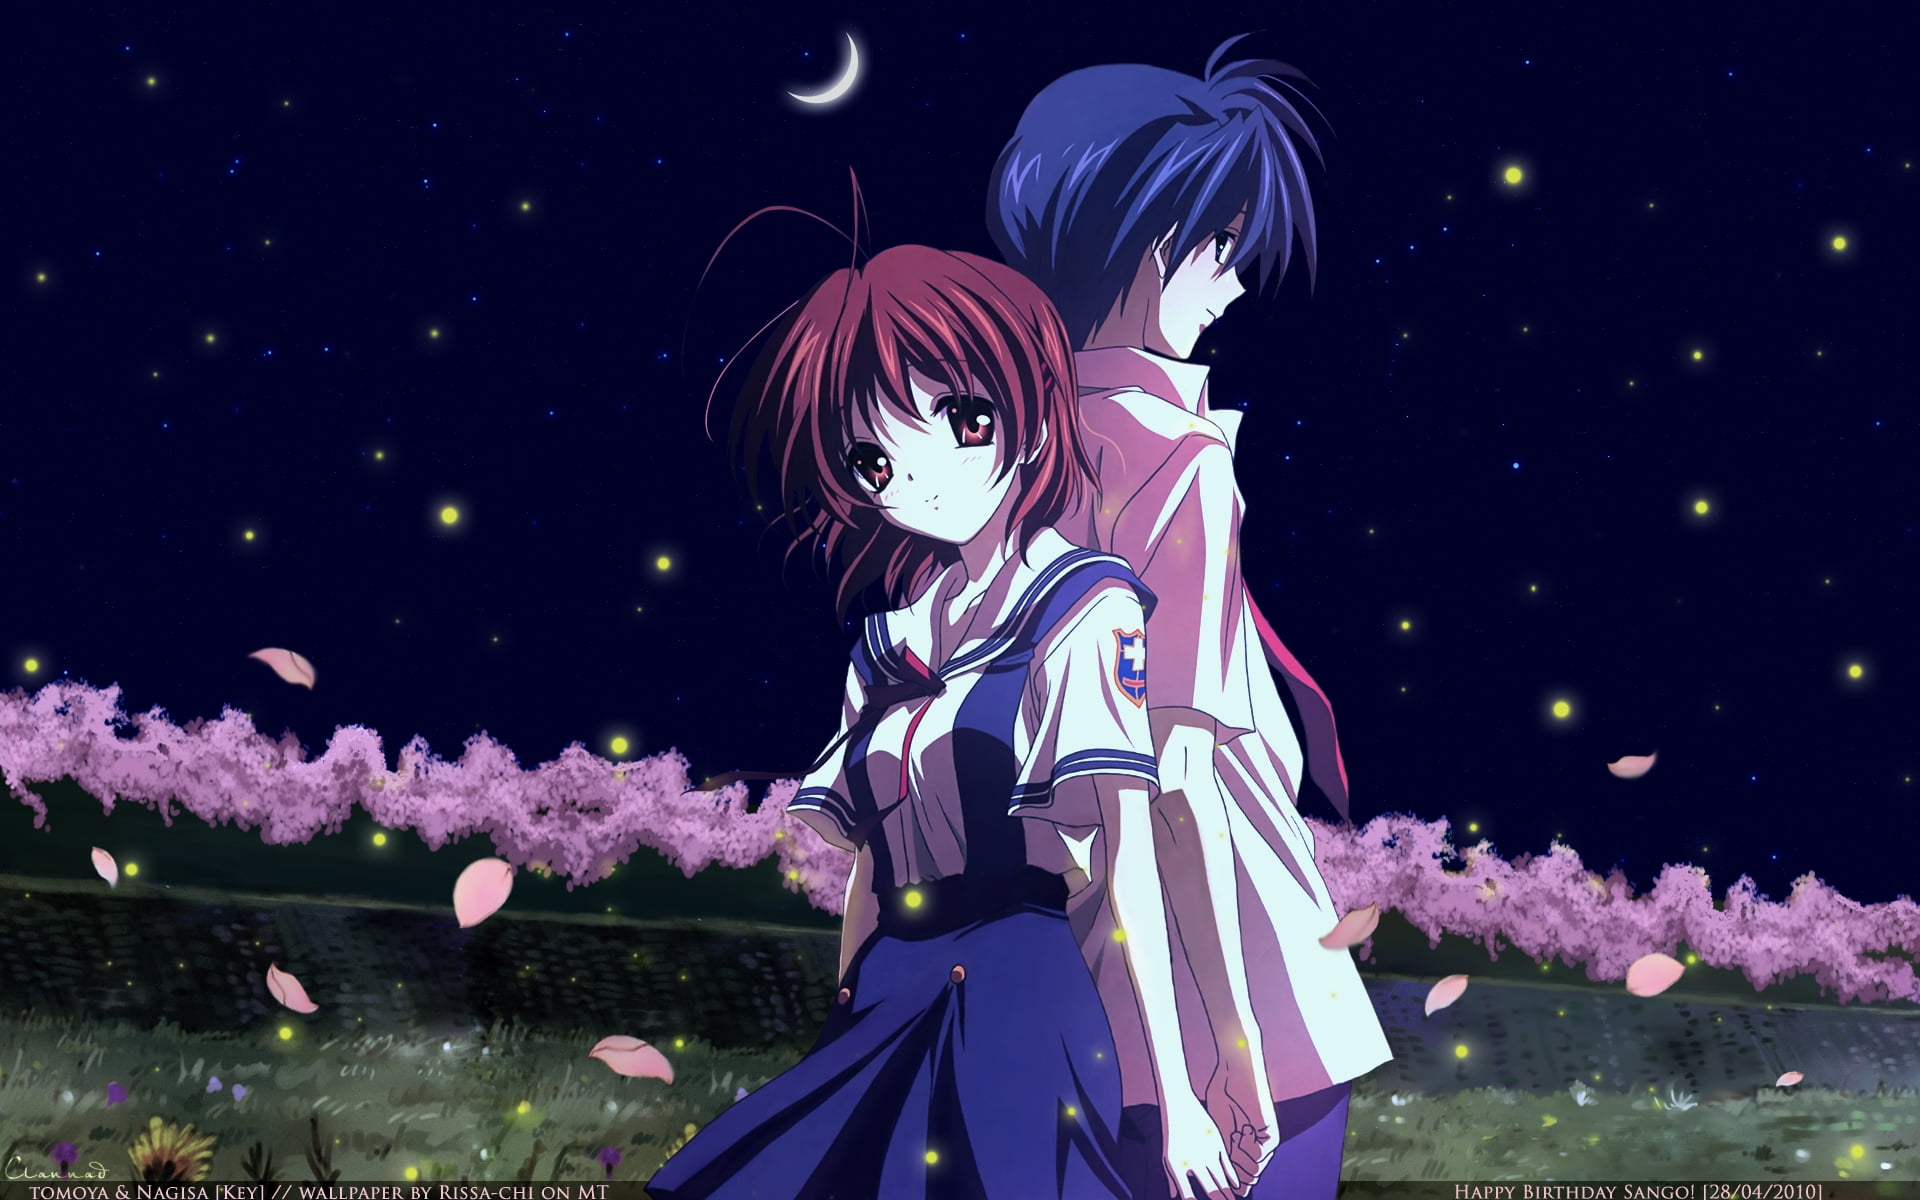 Clannad: After Story | Anime Voice-Over Wiki | Fandom